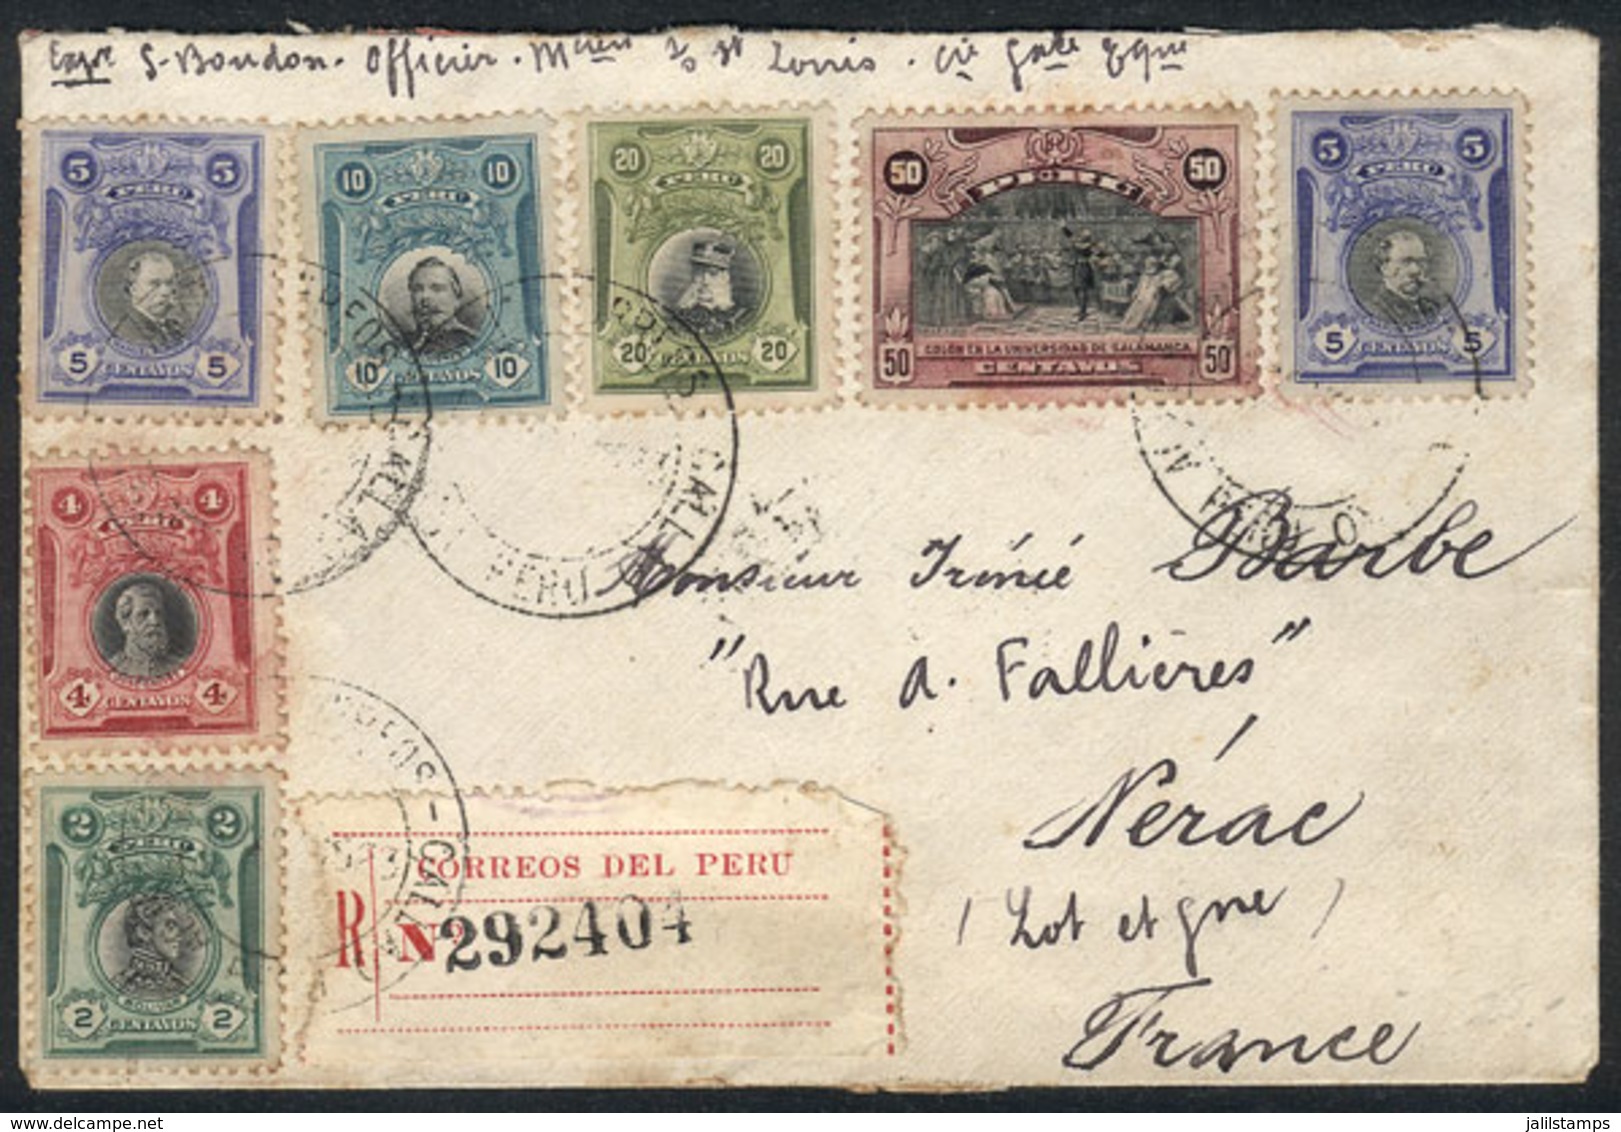 PERU: Registered Cover Franked By Sc.210/1 + 212 X2 + 214 + 216/7, Sent From Callao To France In 1923, VF Quality, Very  - Pérou